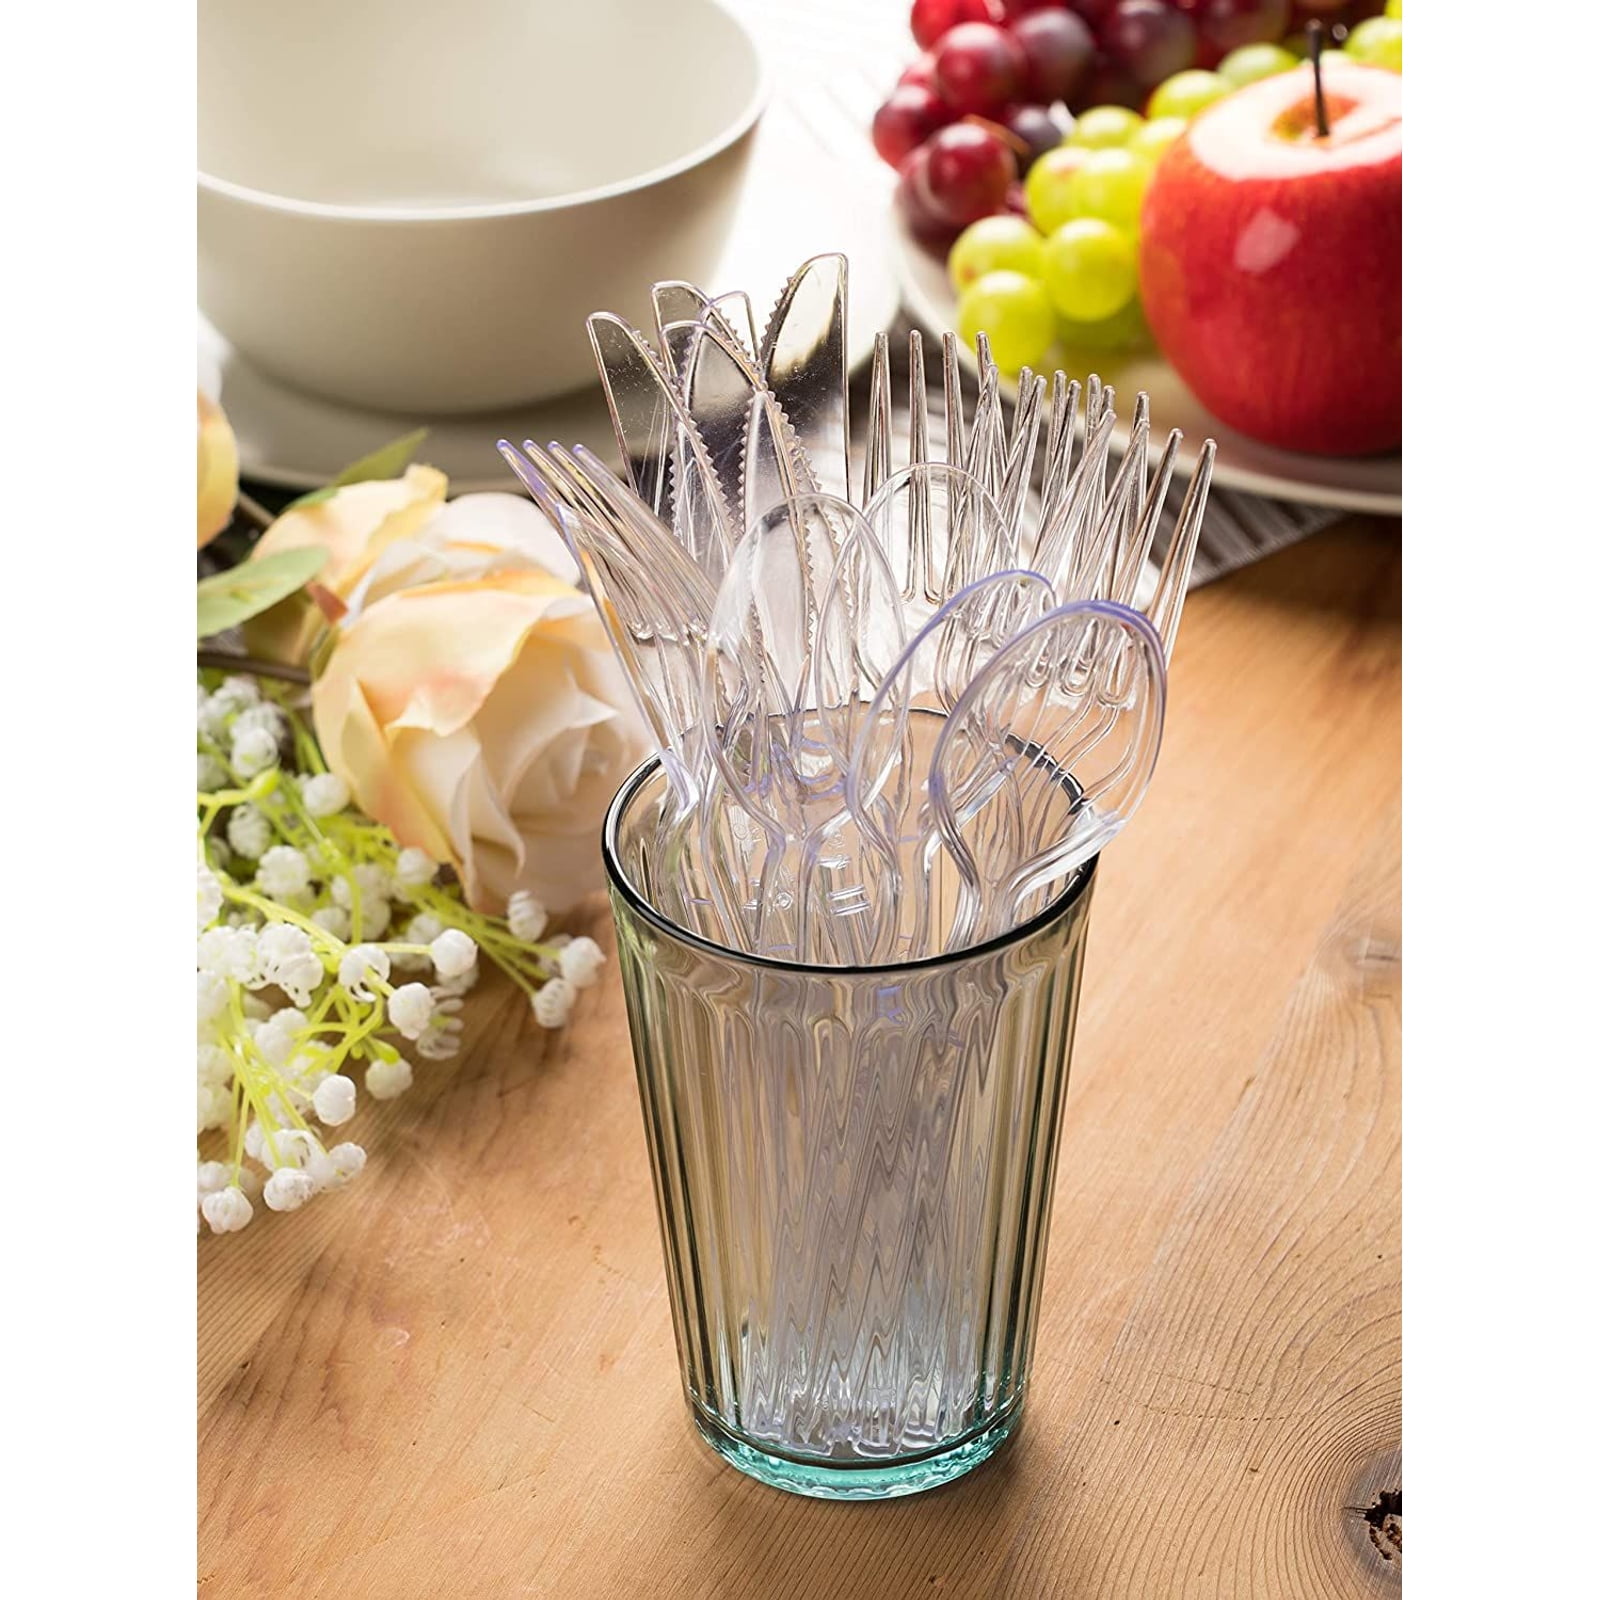 SafeWare 200 Clear Plastic Forks, Heavy Duty, Disposable Utensil Silverware for Party, BBQ, Picnic, Family, Office, Restaurant